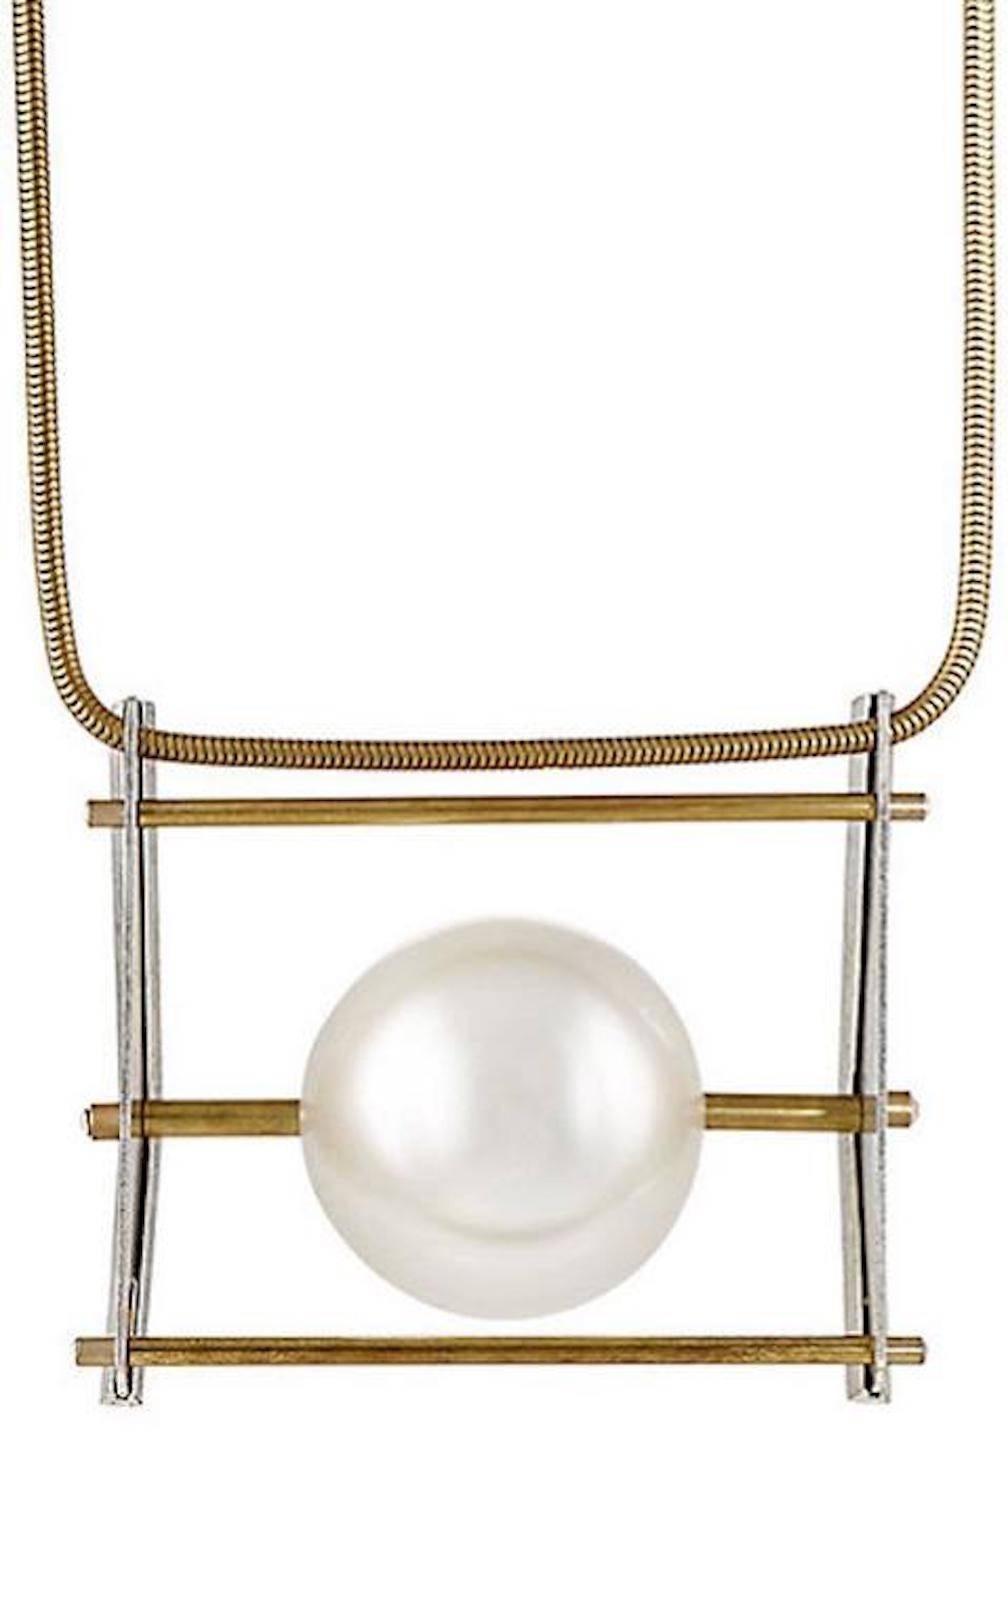 CURATOR'S NOTES  

Brass 
Faux pearl 
Crystal 
Made in France 
Adjustable push-lock clasp 
Total length 23"

Shop Newfound Luxury for authentic Lanvin necklaces and jewelry.